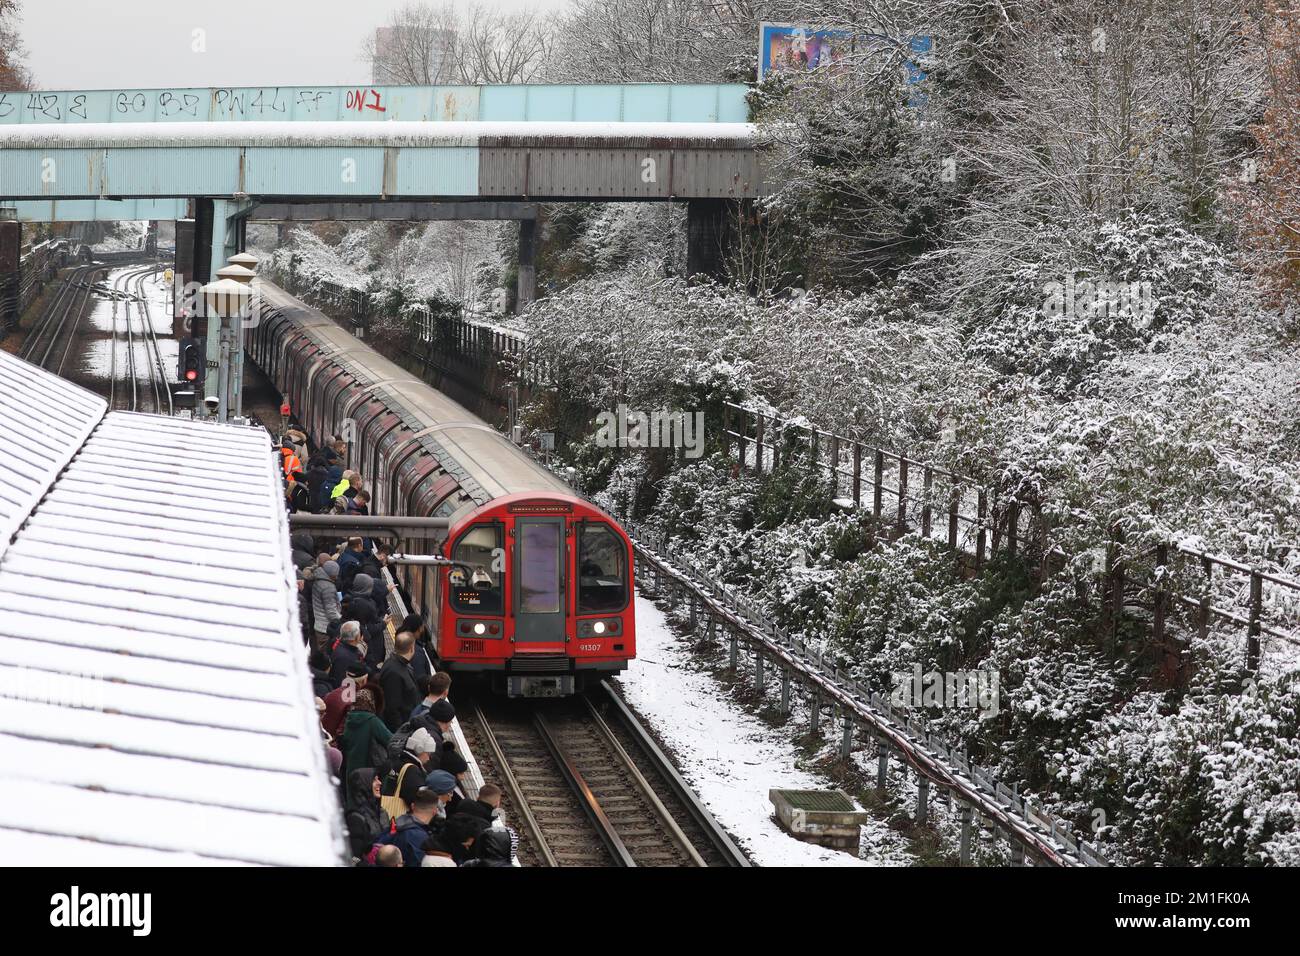 London, UK. 12th Dec, 2022. Commuters wait at the platform for a delayed train at North Acton Underground Station, west London. Snow and ice have swept across parts of the UK, with cold wintry conditions set to continue for days.. Picture date: Monday December 12, 2022. Credit: Isabel Infantes/Alamy Live News Credit: Isabel Infantes/Alamy Live News Stock Photo